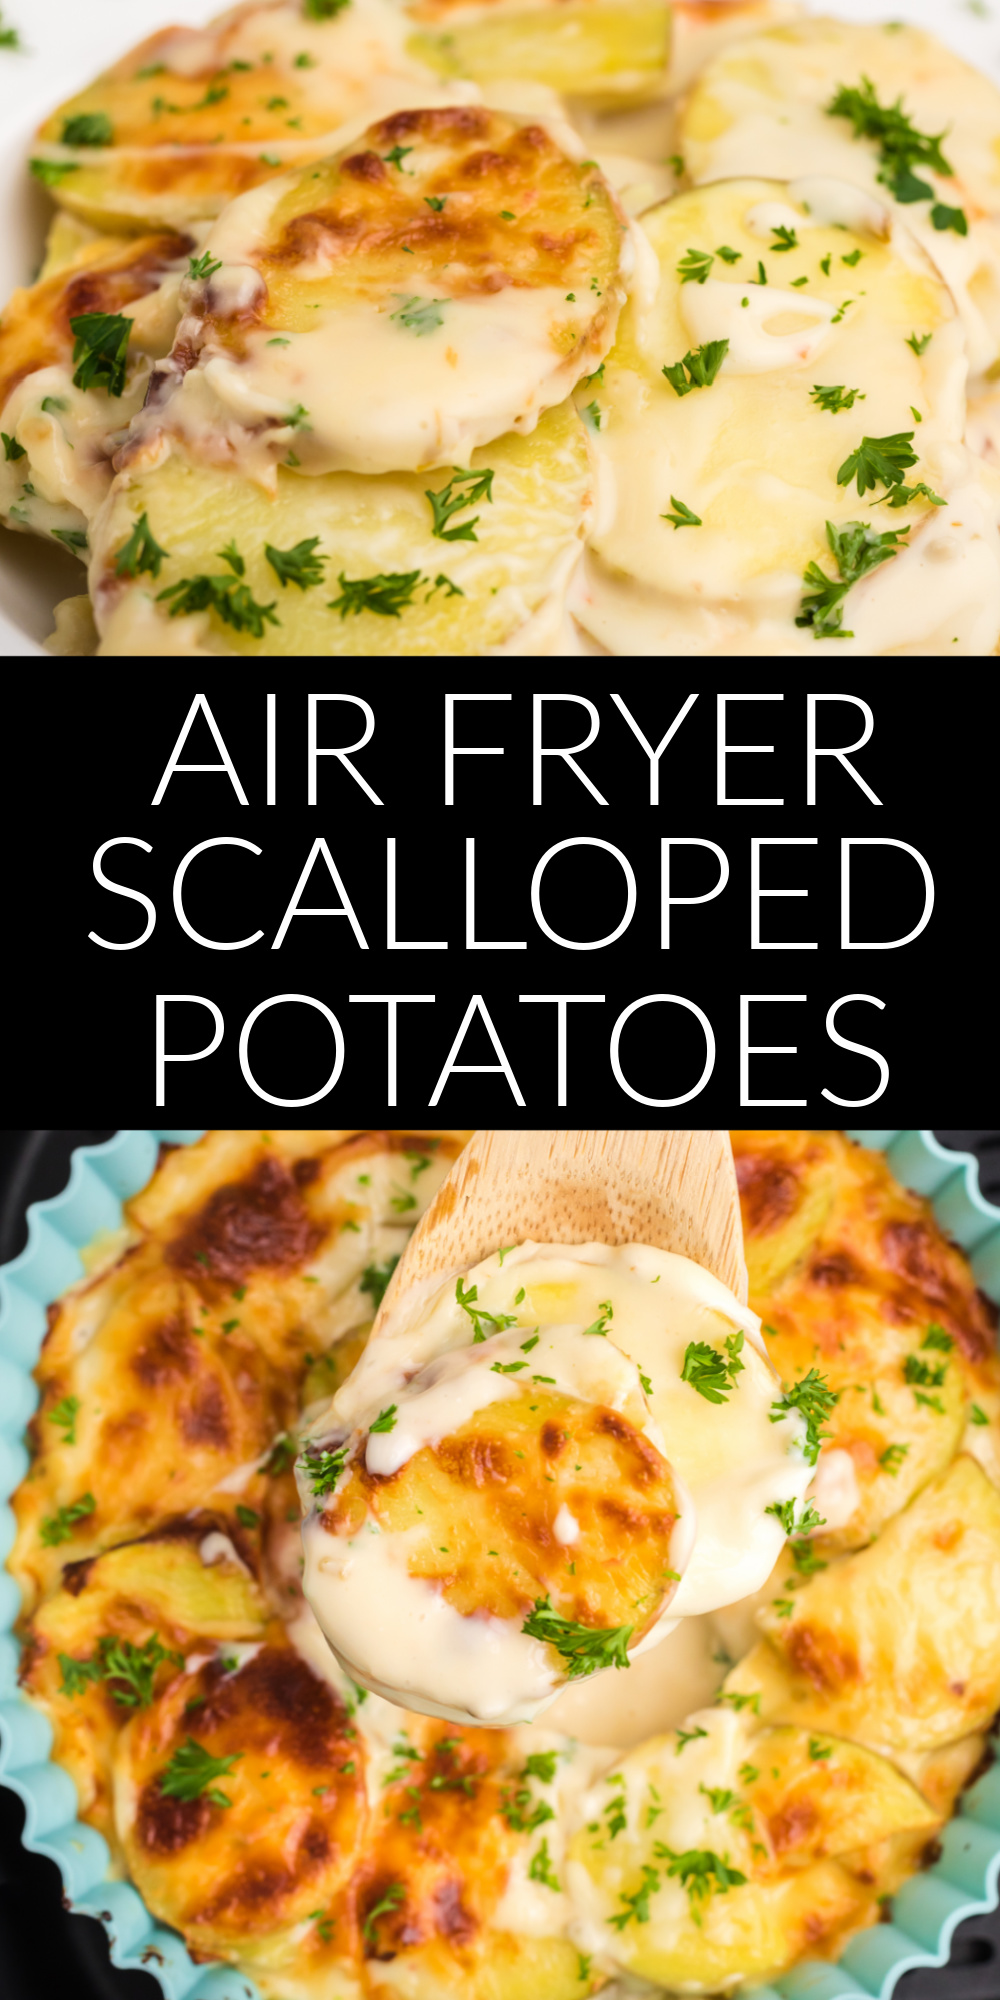 Air fryer scalloped potatoes are an easy, cheesy side dish. The flavors are amazing and this simple recipe is soon to be a family favorite.